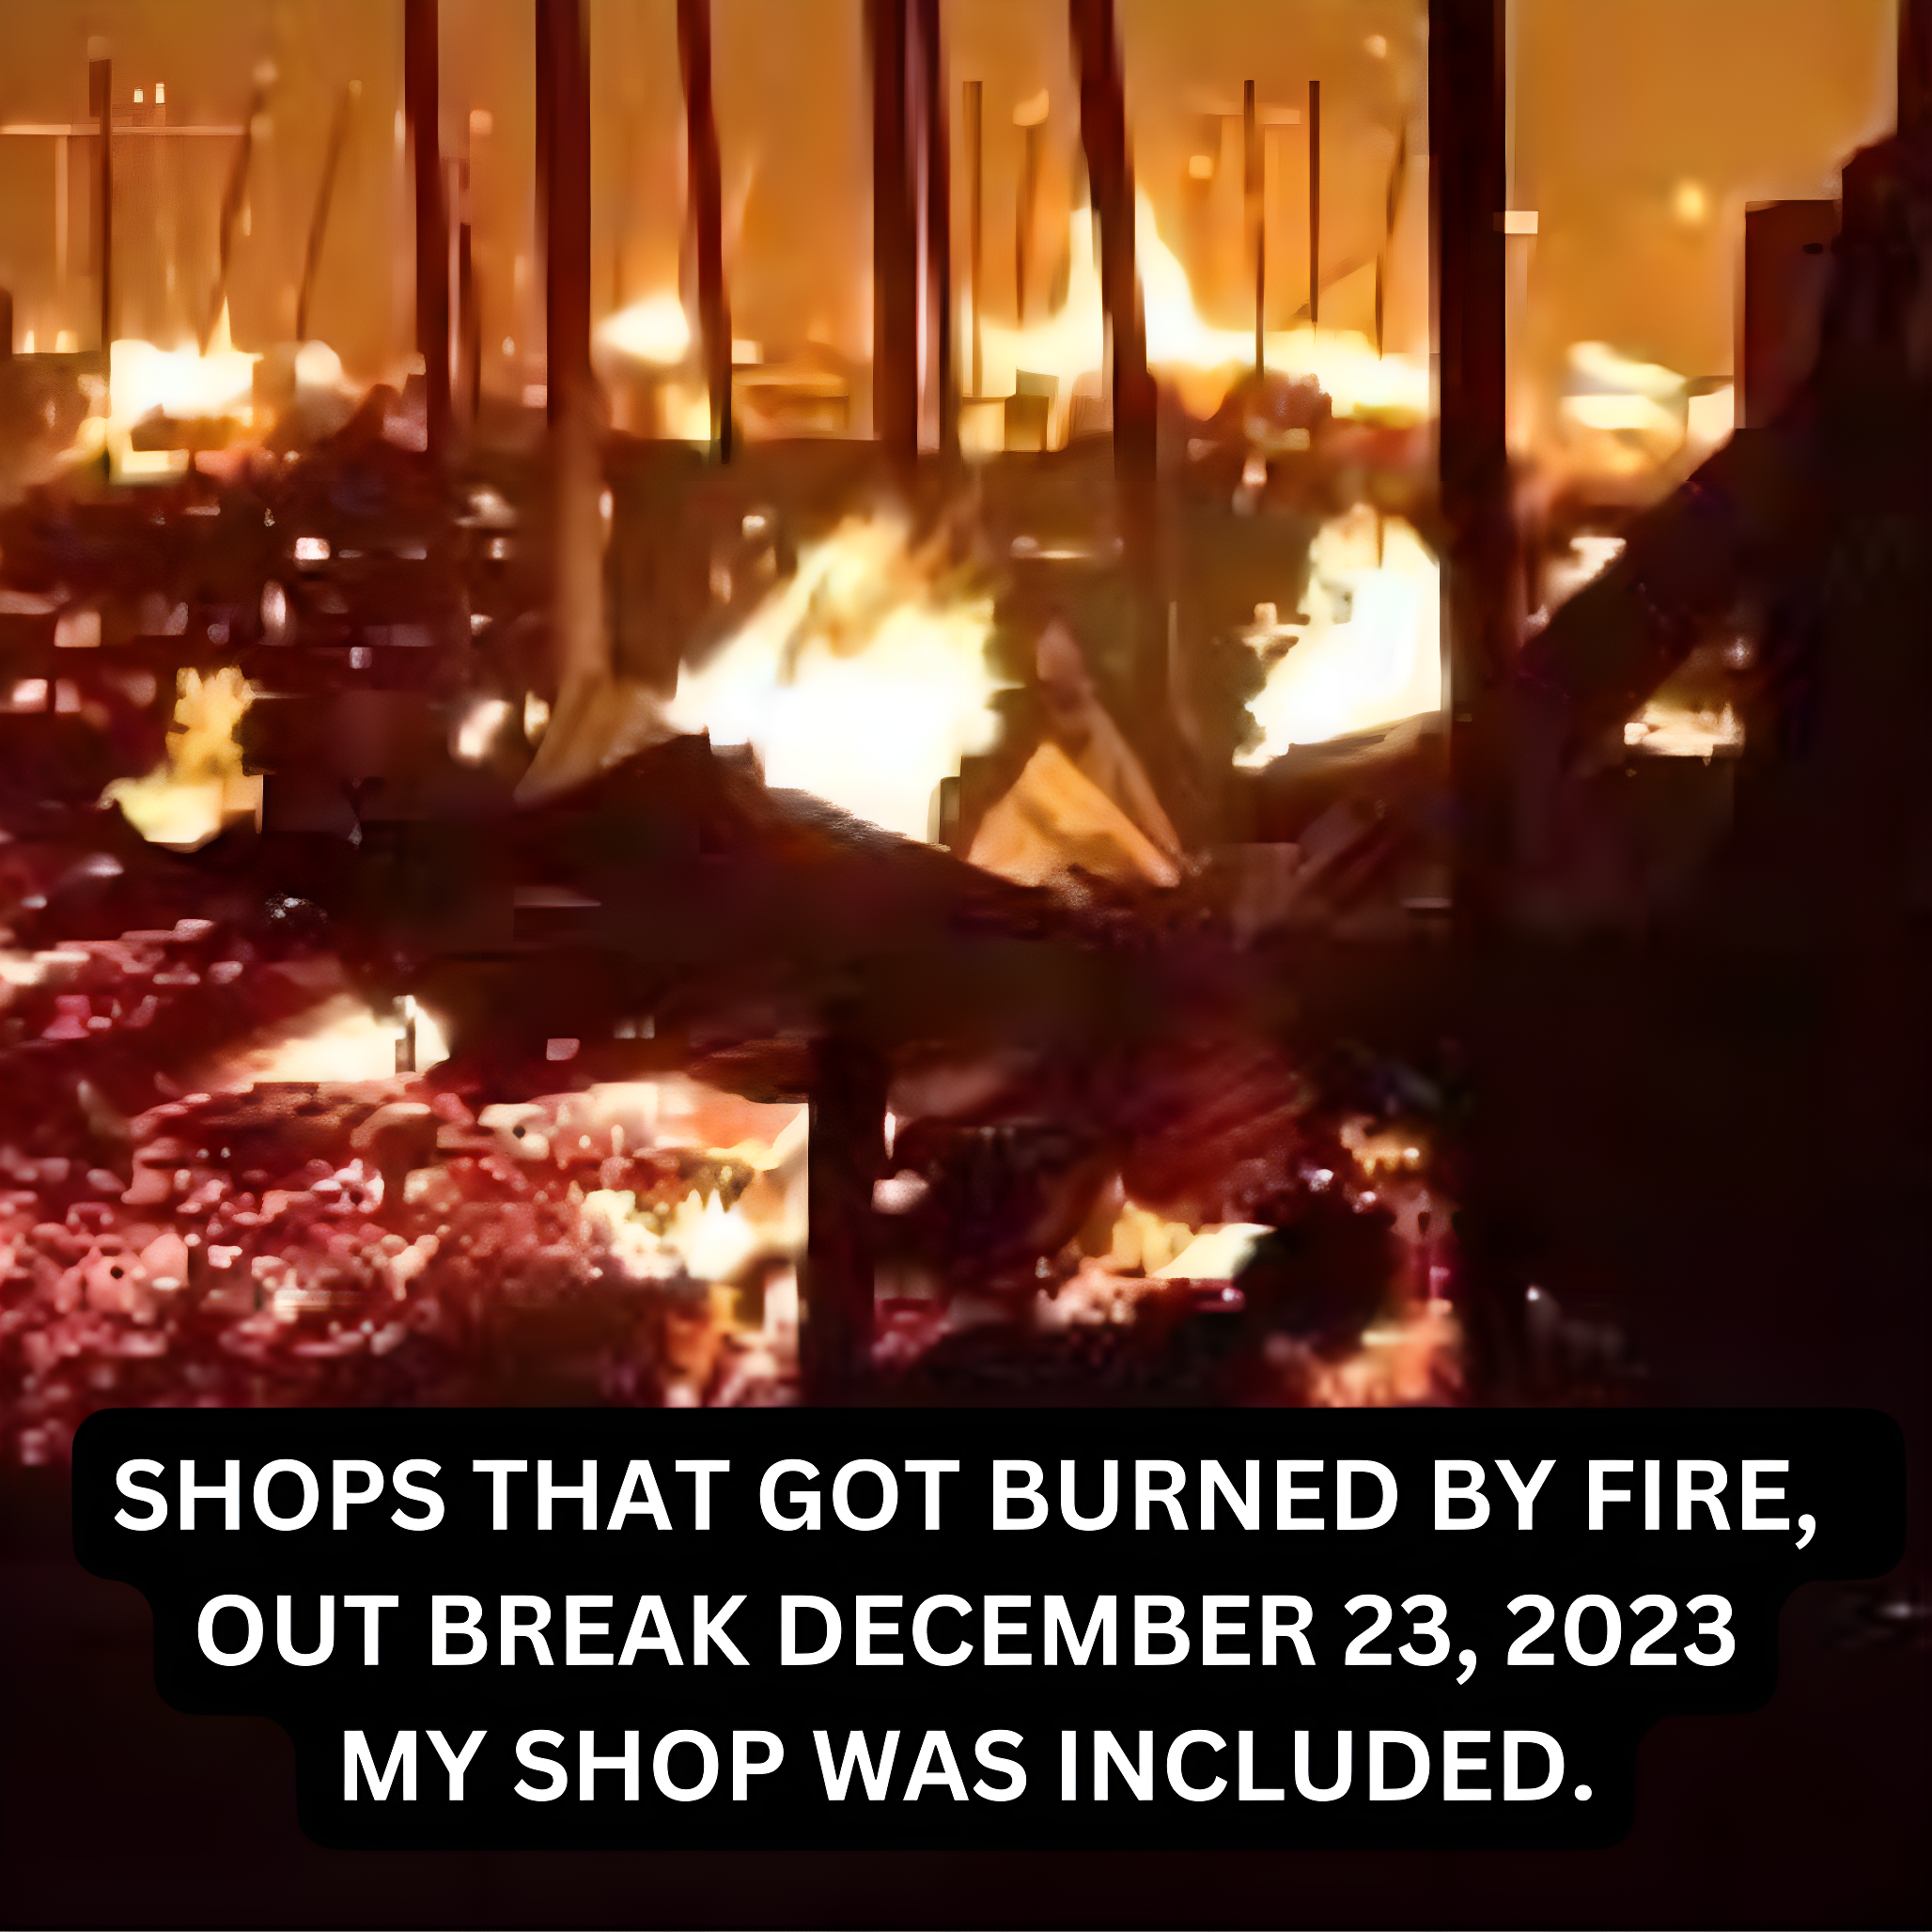 THIS IS THE FIRE OUT BREAK THAT DESTROYED MY SHOP AND BURN DAWN ALL MY GOODS AND STUFF, DECEMBER 23, 2023.